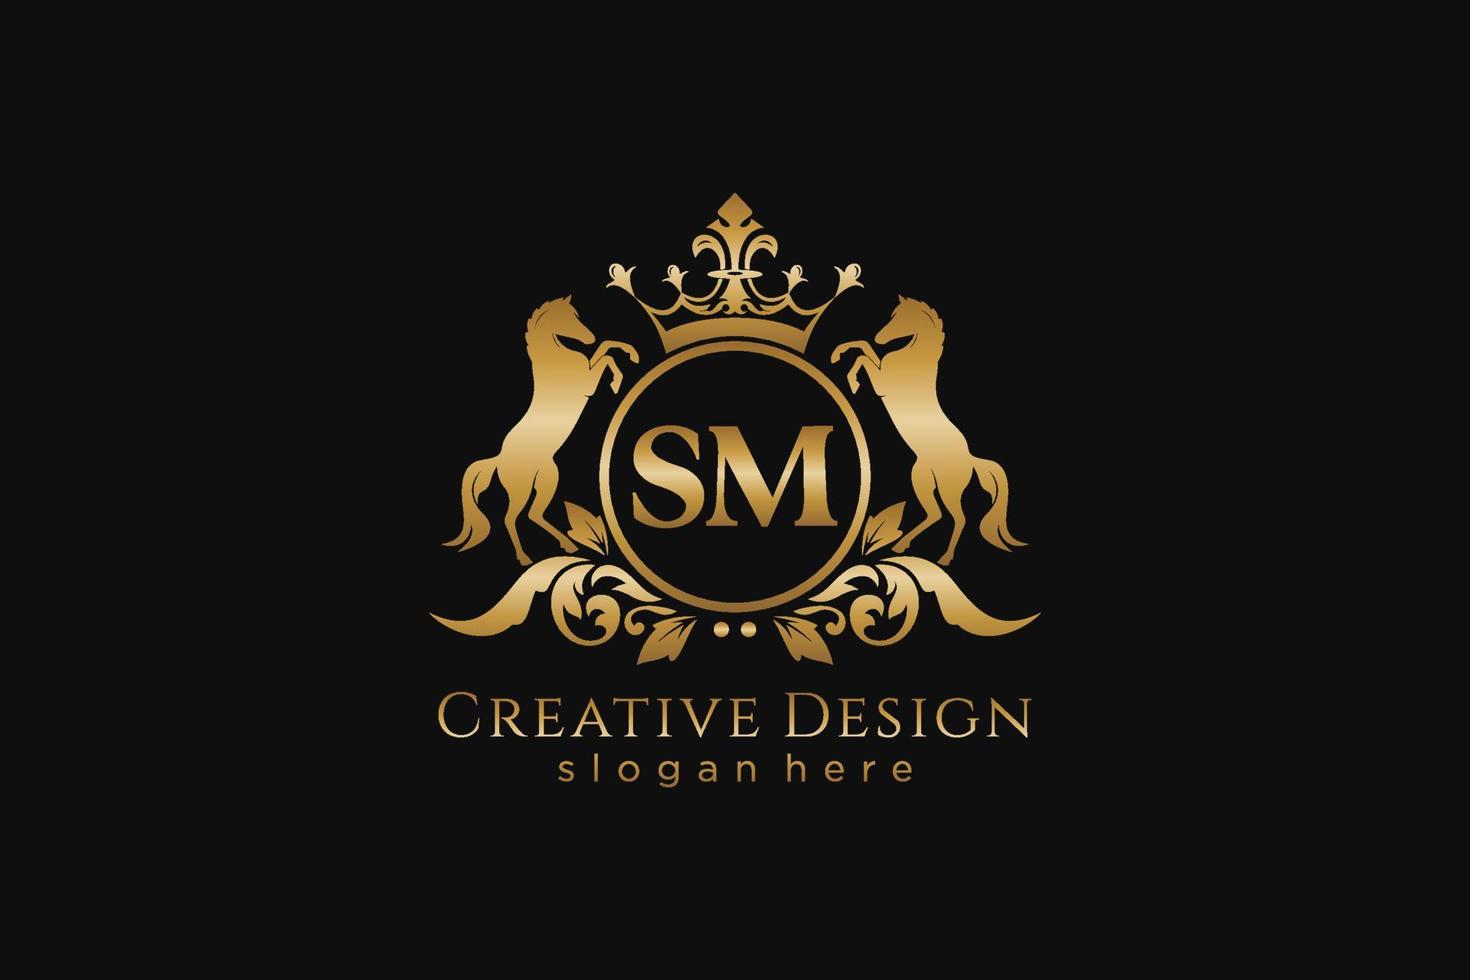 initial SM Retro golden crest with circle and two horses, badge template with scrolls and royal crown - perfect for luxurious branding projects vector